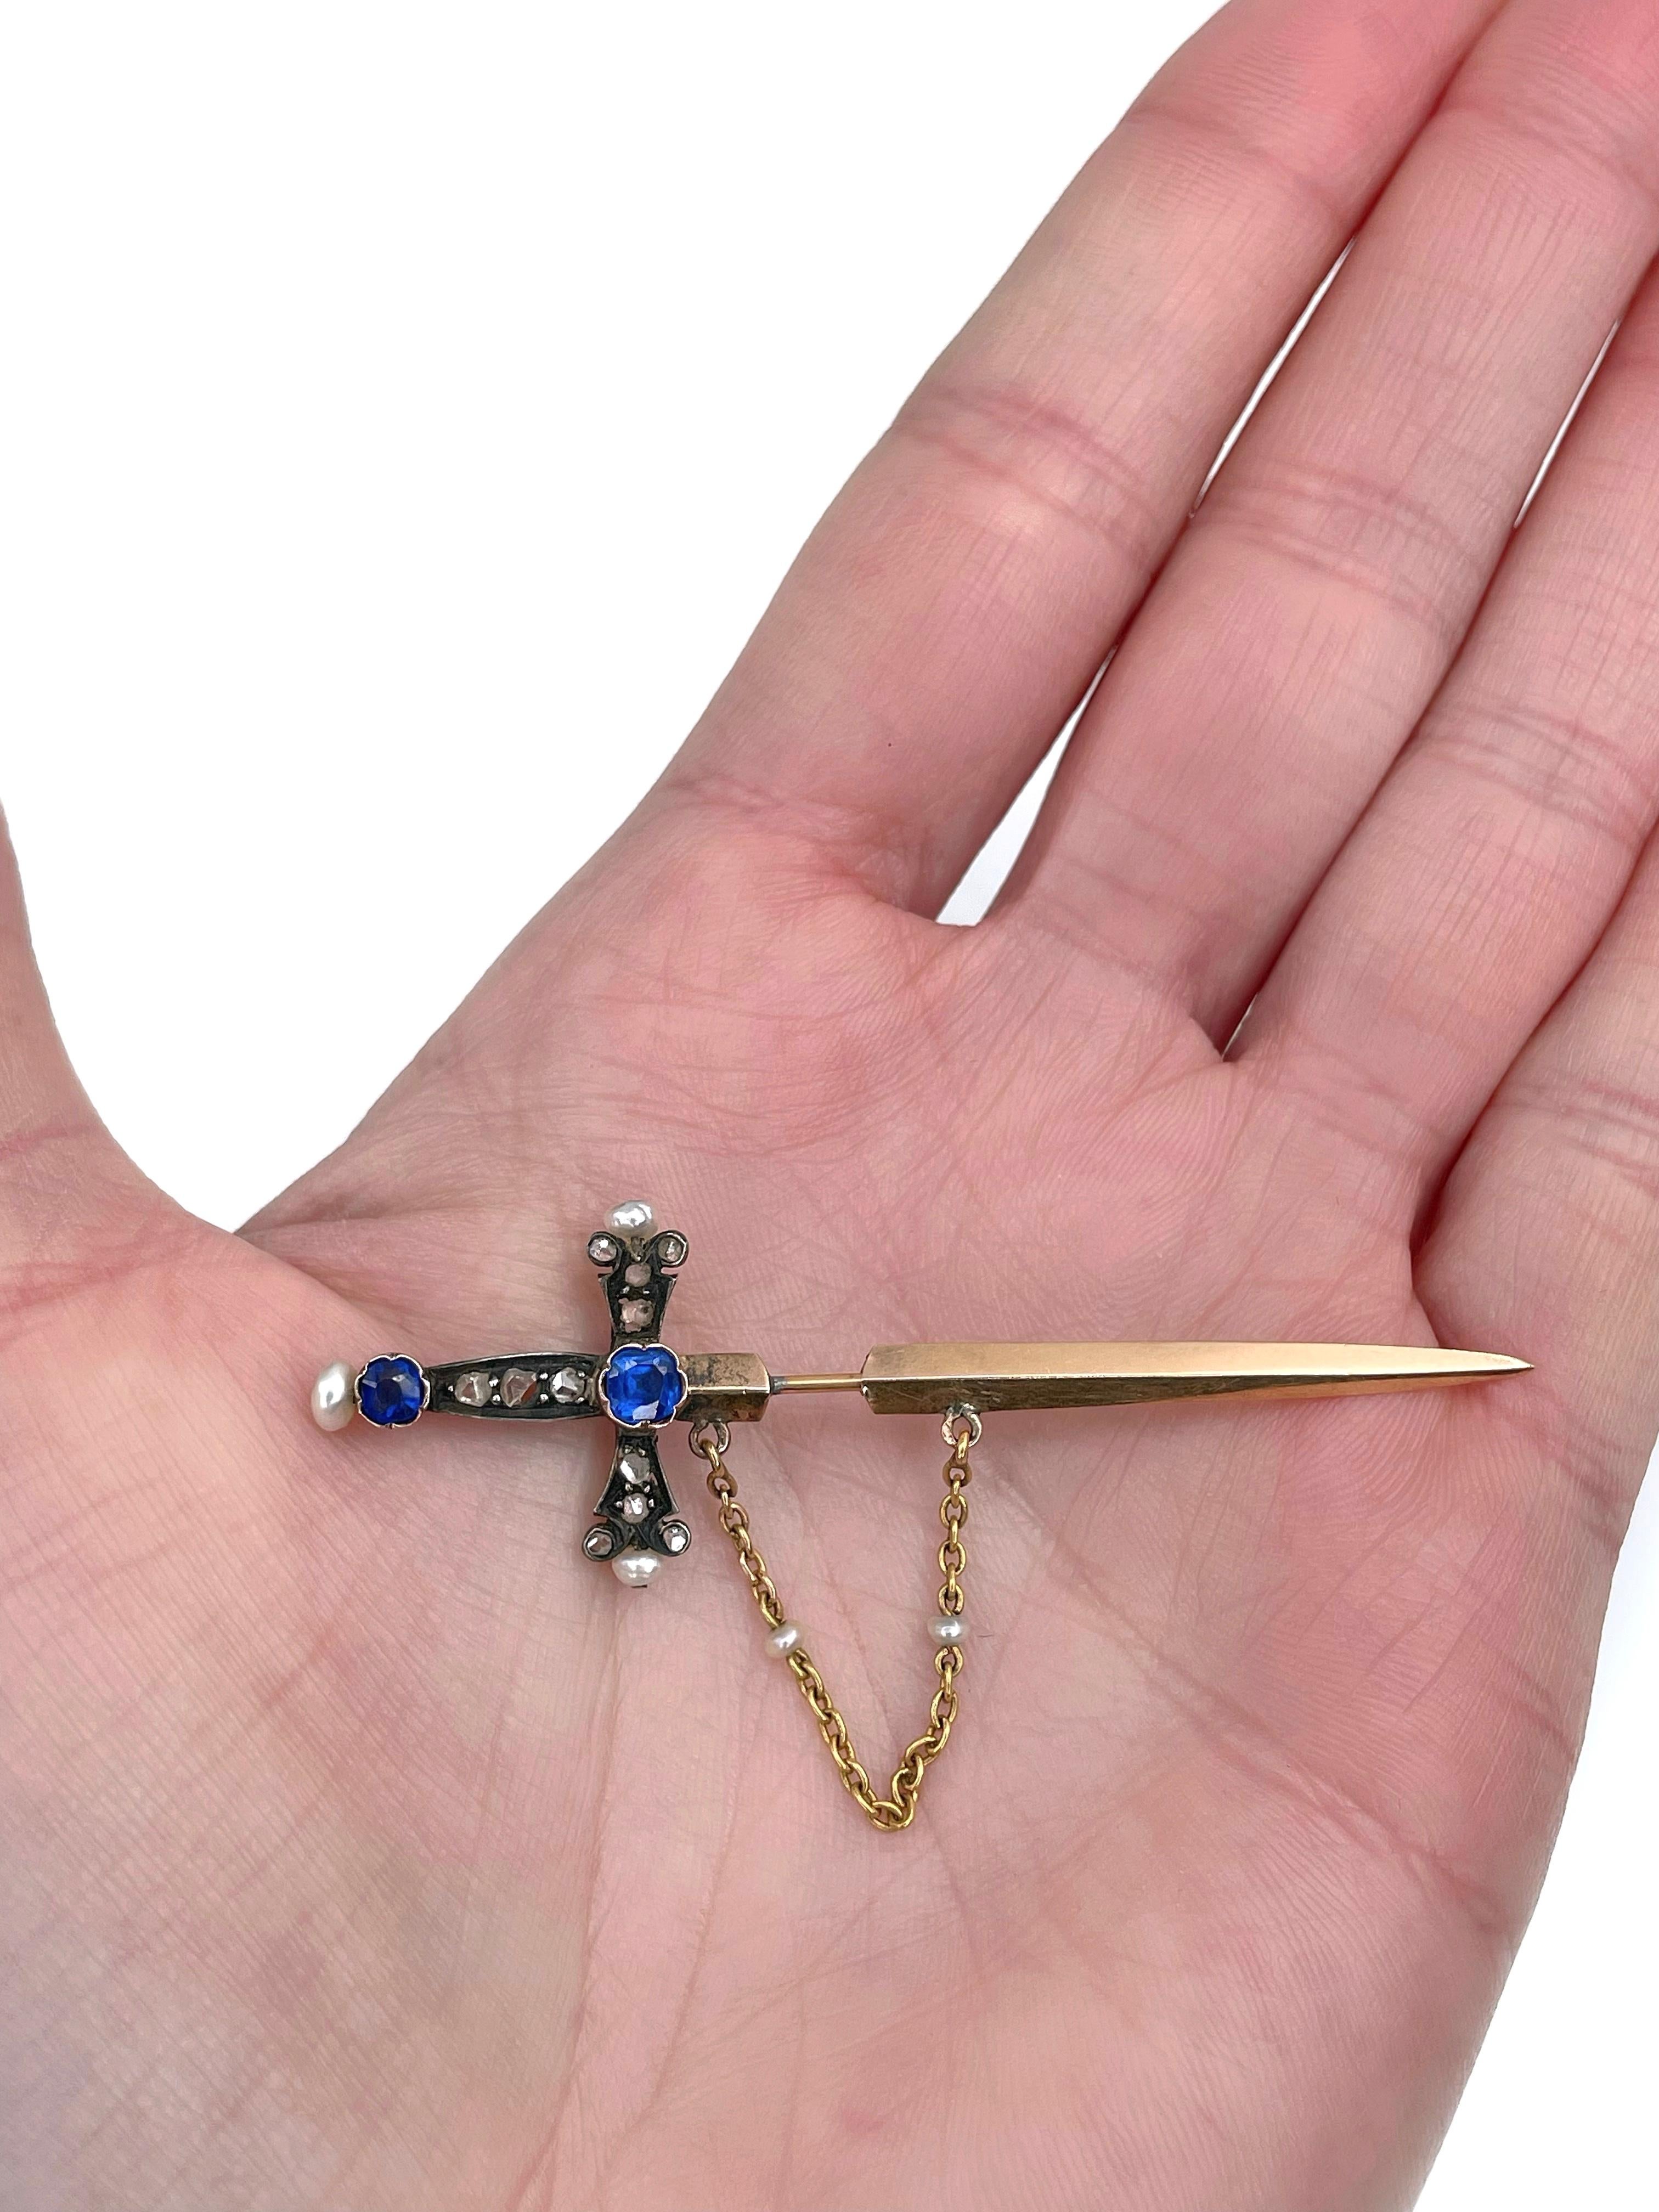 This is a Victorian bejeweled jabot sword stick pin brooch. It is crafted in 18K gold. Circa 1900. The piece features rose cut diamonds and seed pearls. 

Weight: 2.93g
Length: 6cm
Chain length: 4.5cm

———

If you have any questions, please feel